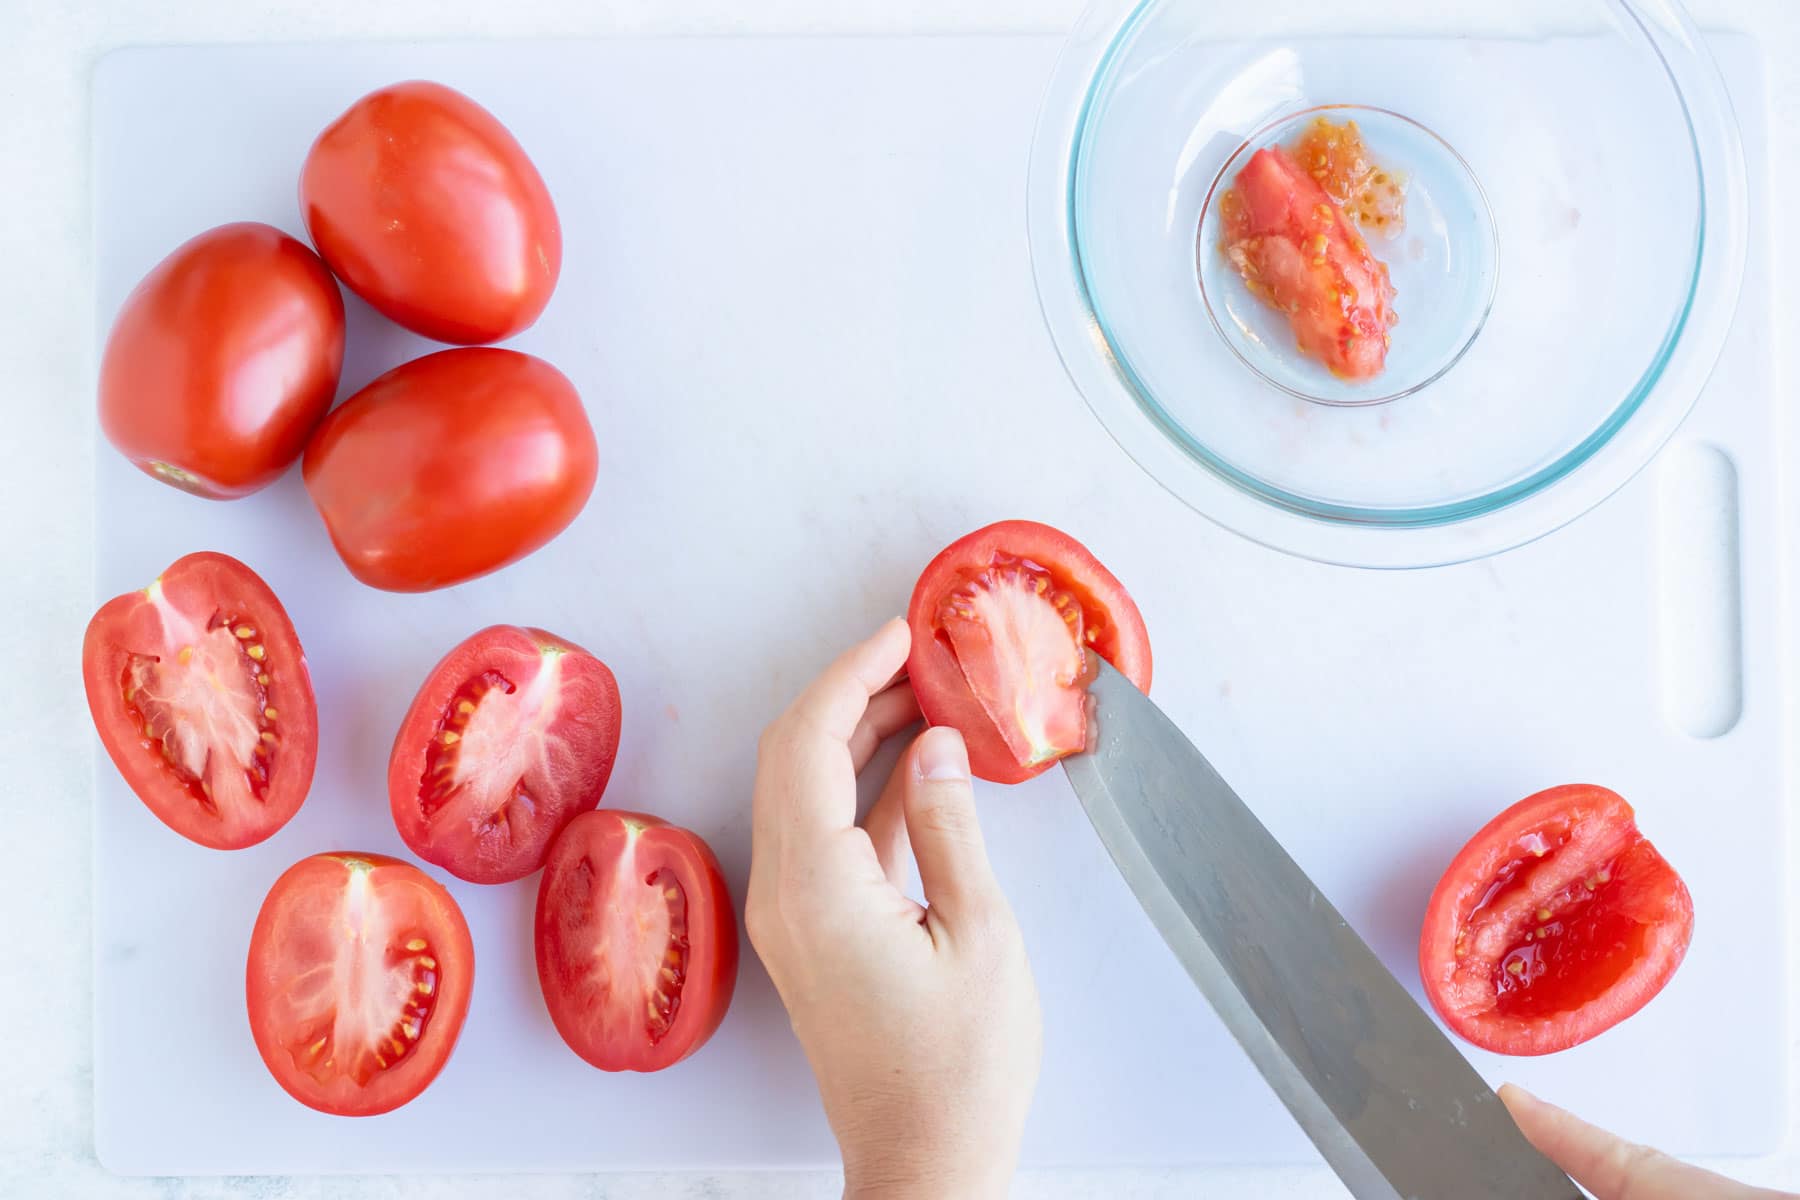 A hand deseeding a tomato with a knife.